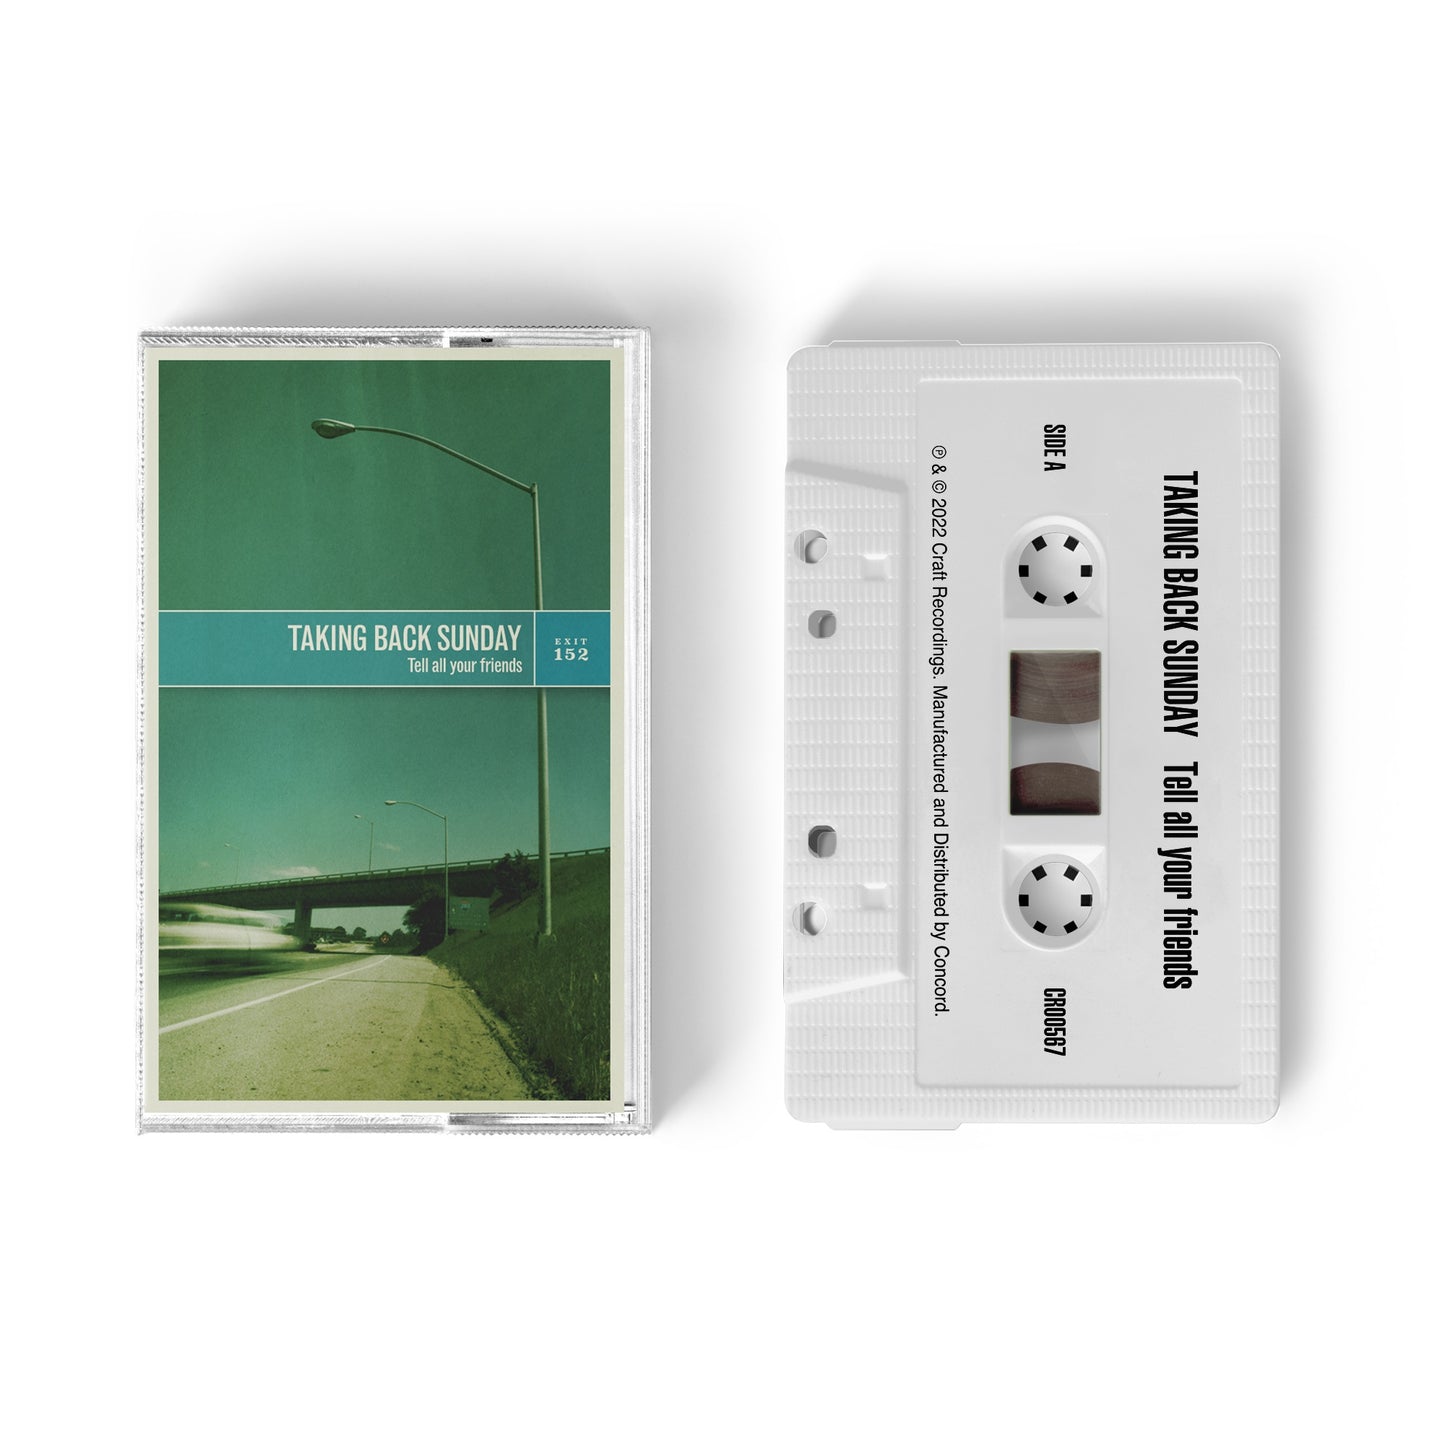 Tell All Your Friends (20th Anniversary Edition) [White Cassette]